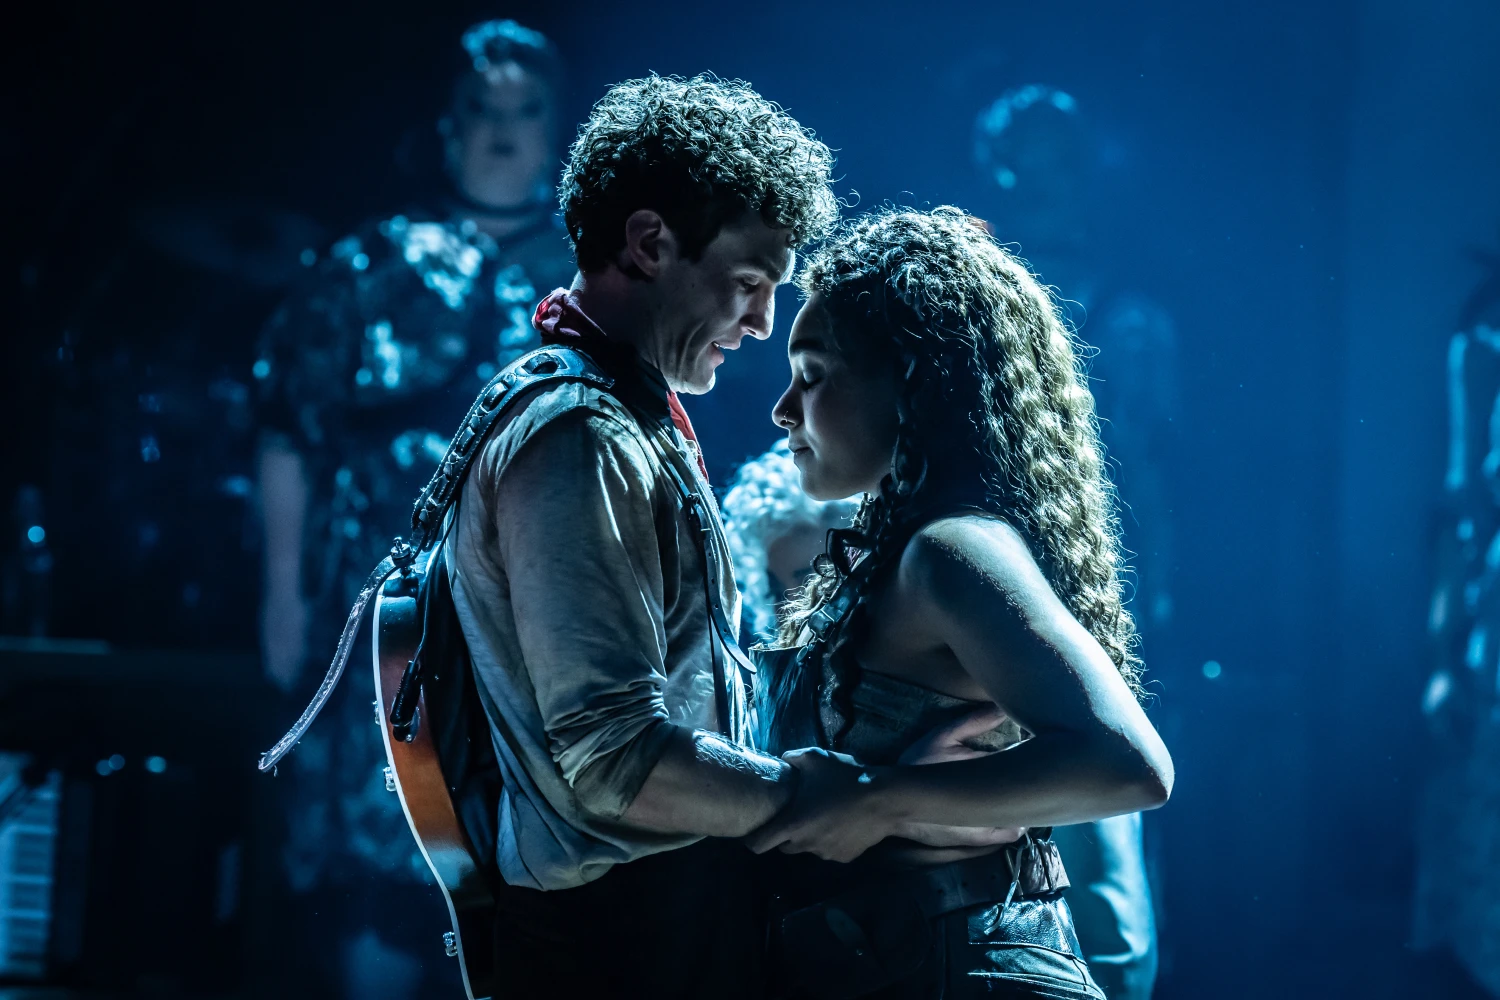 Hadestown at Theatre Royal Sydney: What to expect - 7